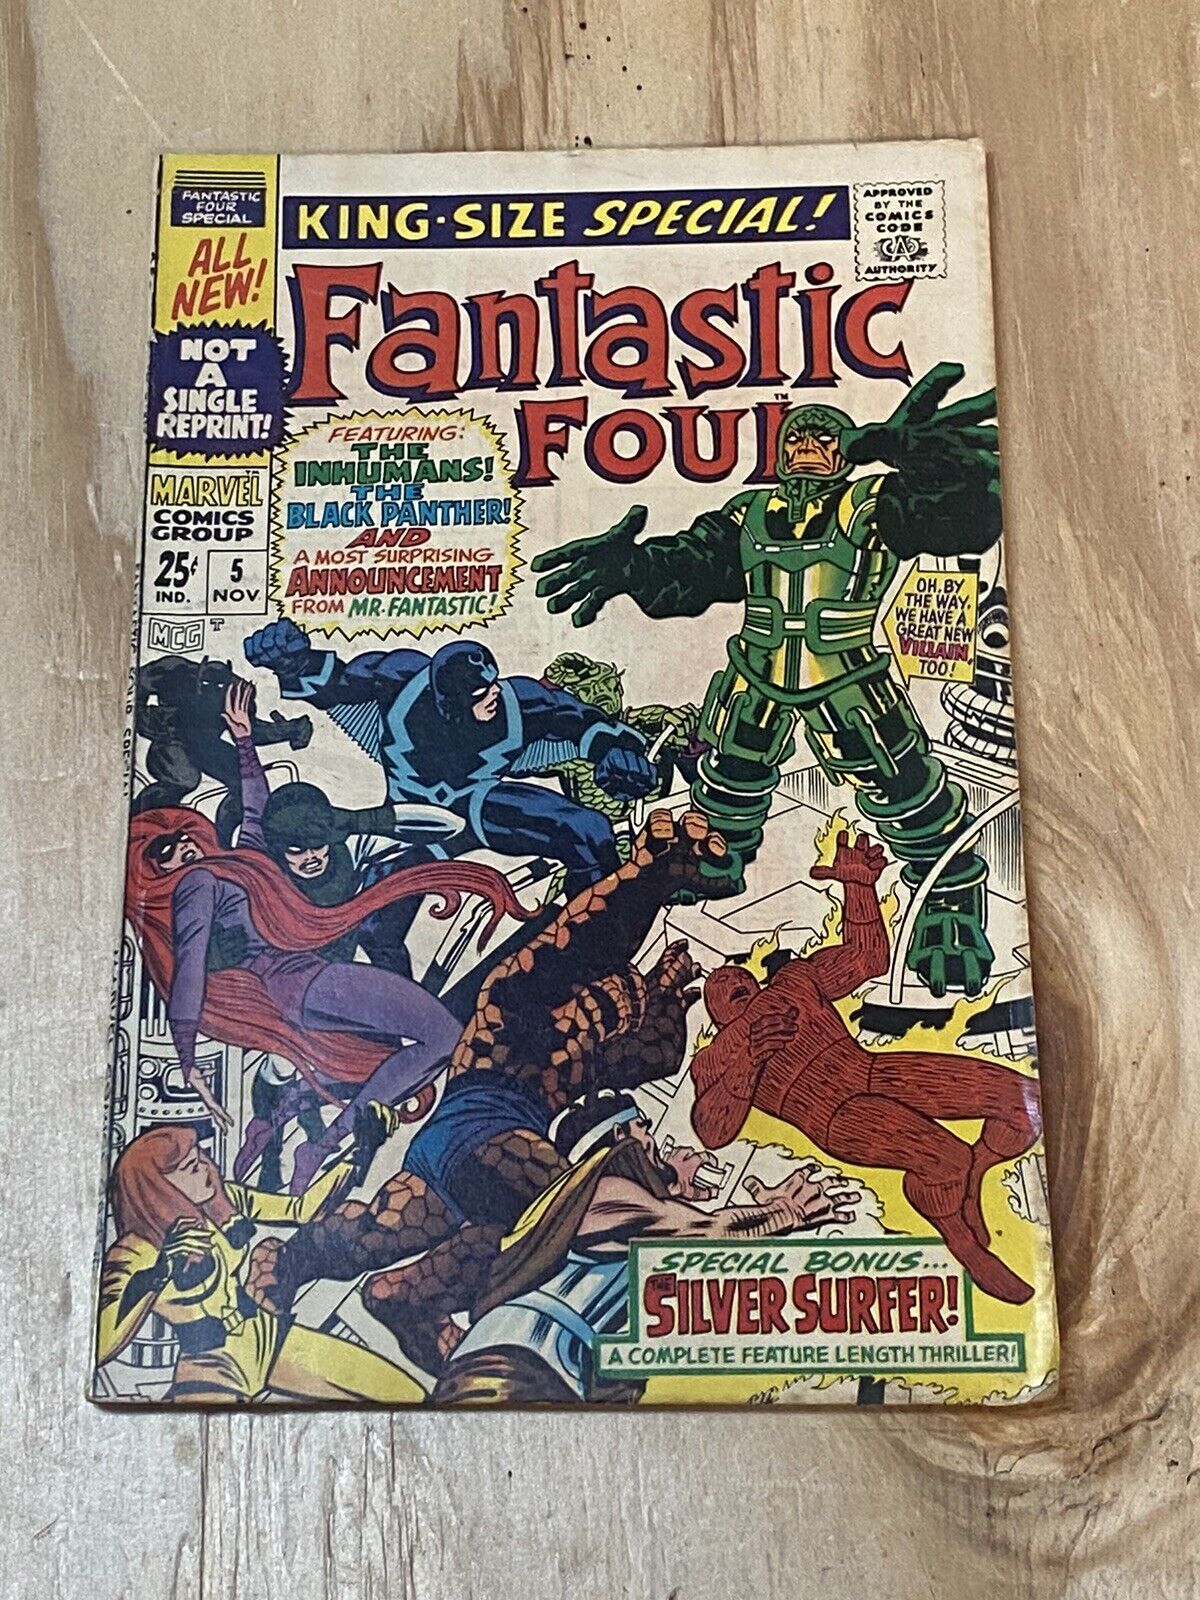 FANTASTIC FOUR KING-SIZE SPECIAL #5, 1ST PSYCHO MAN, SILVER SURFER SOLO Marvel